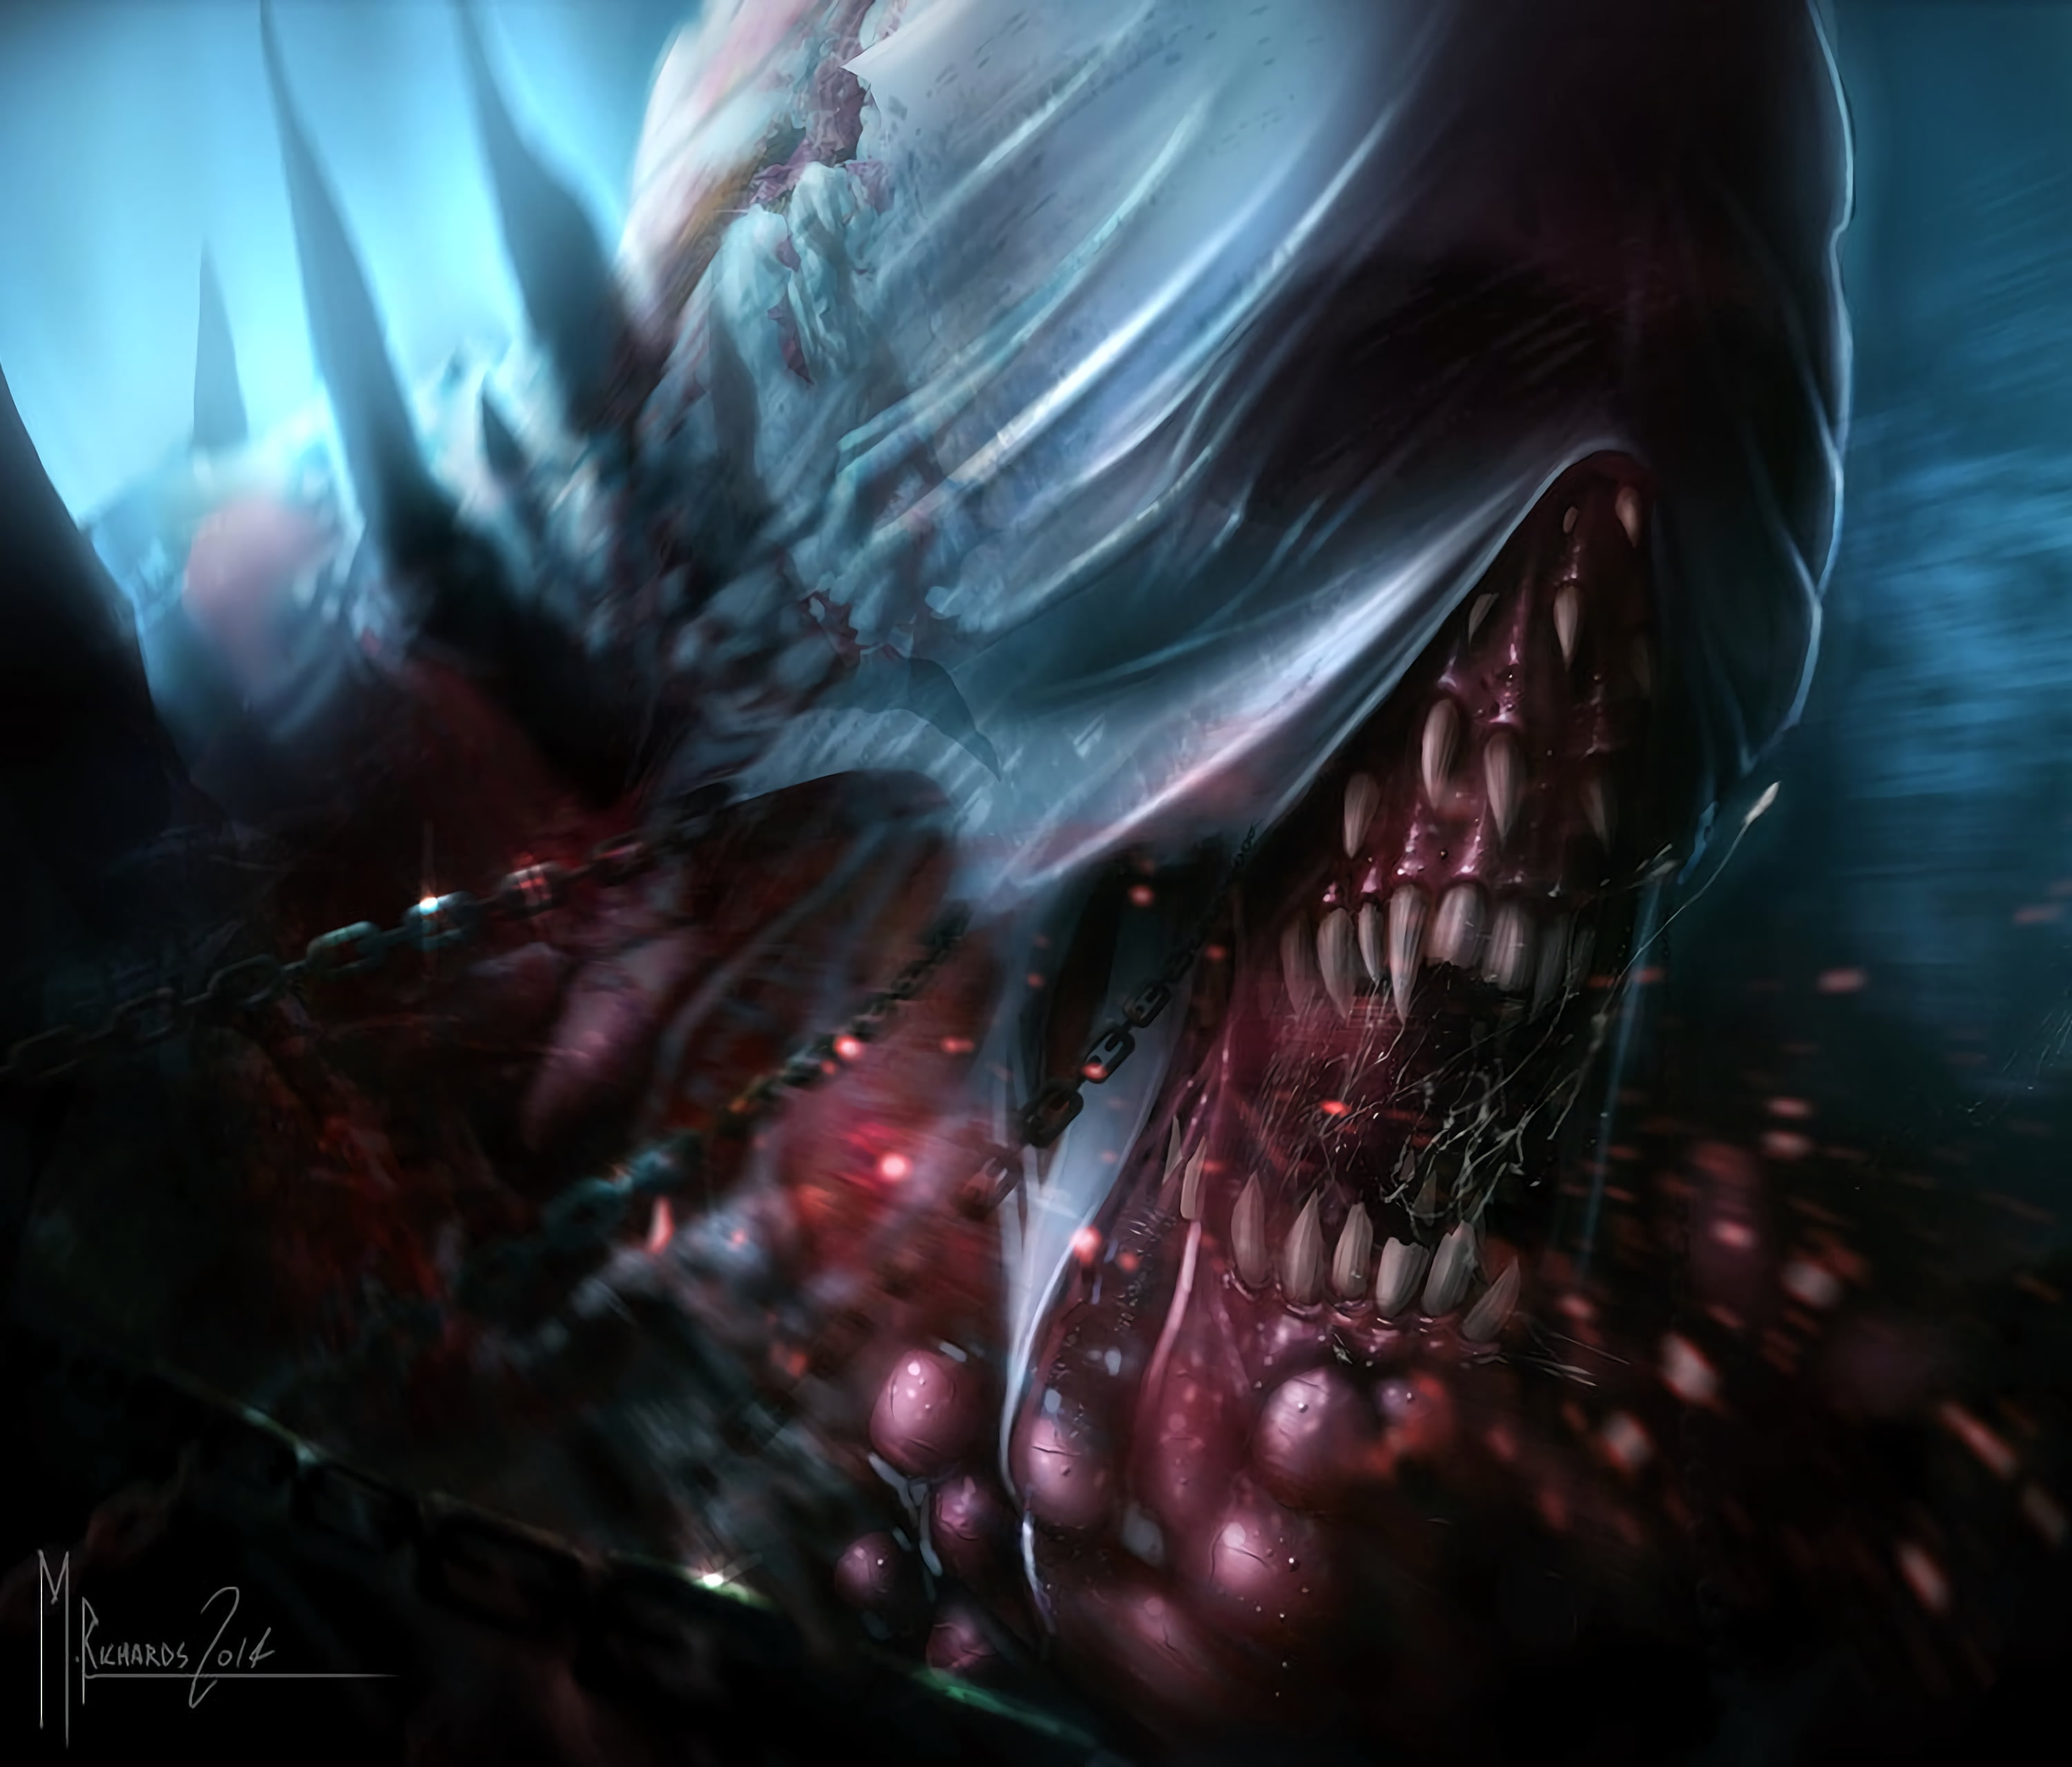 gray and pink wallpaper, monster, jaw, teeth, art, grin, water